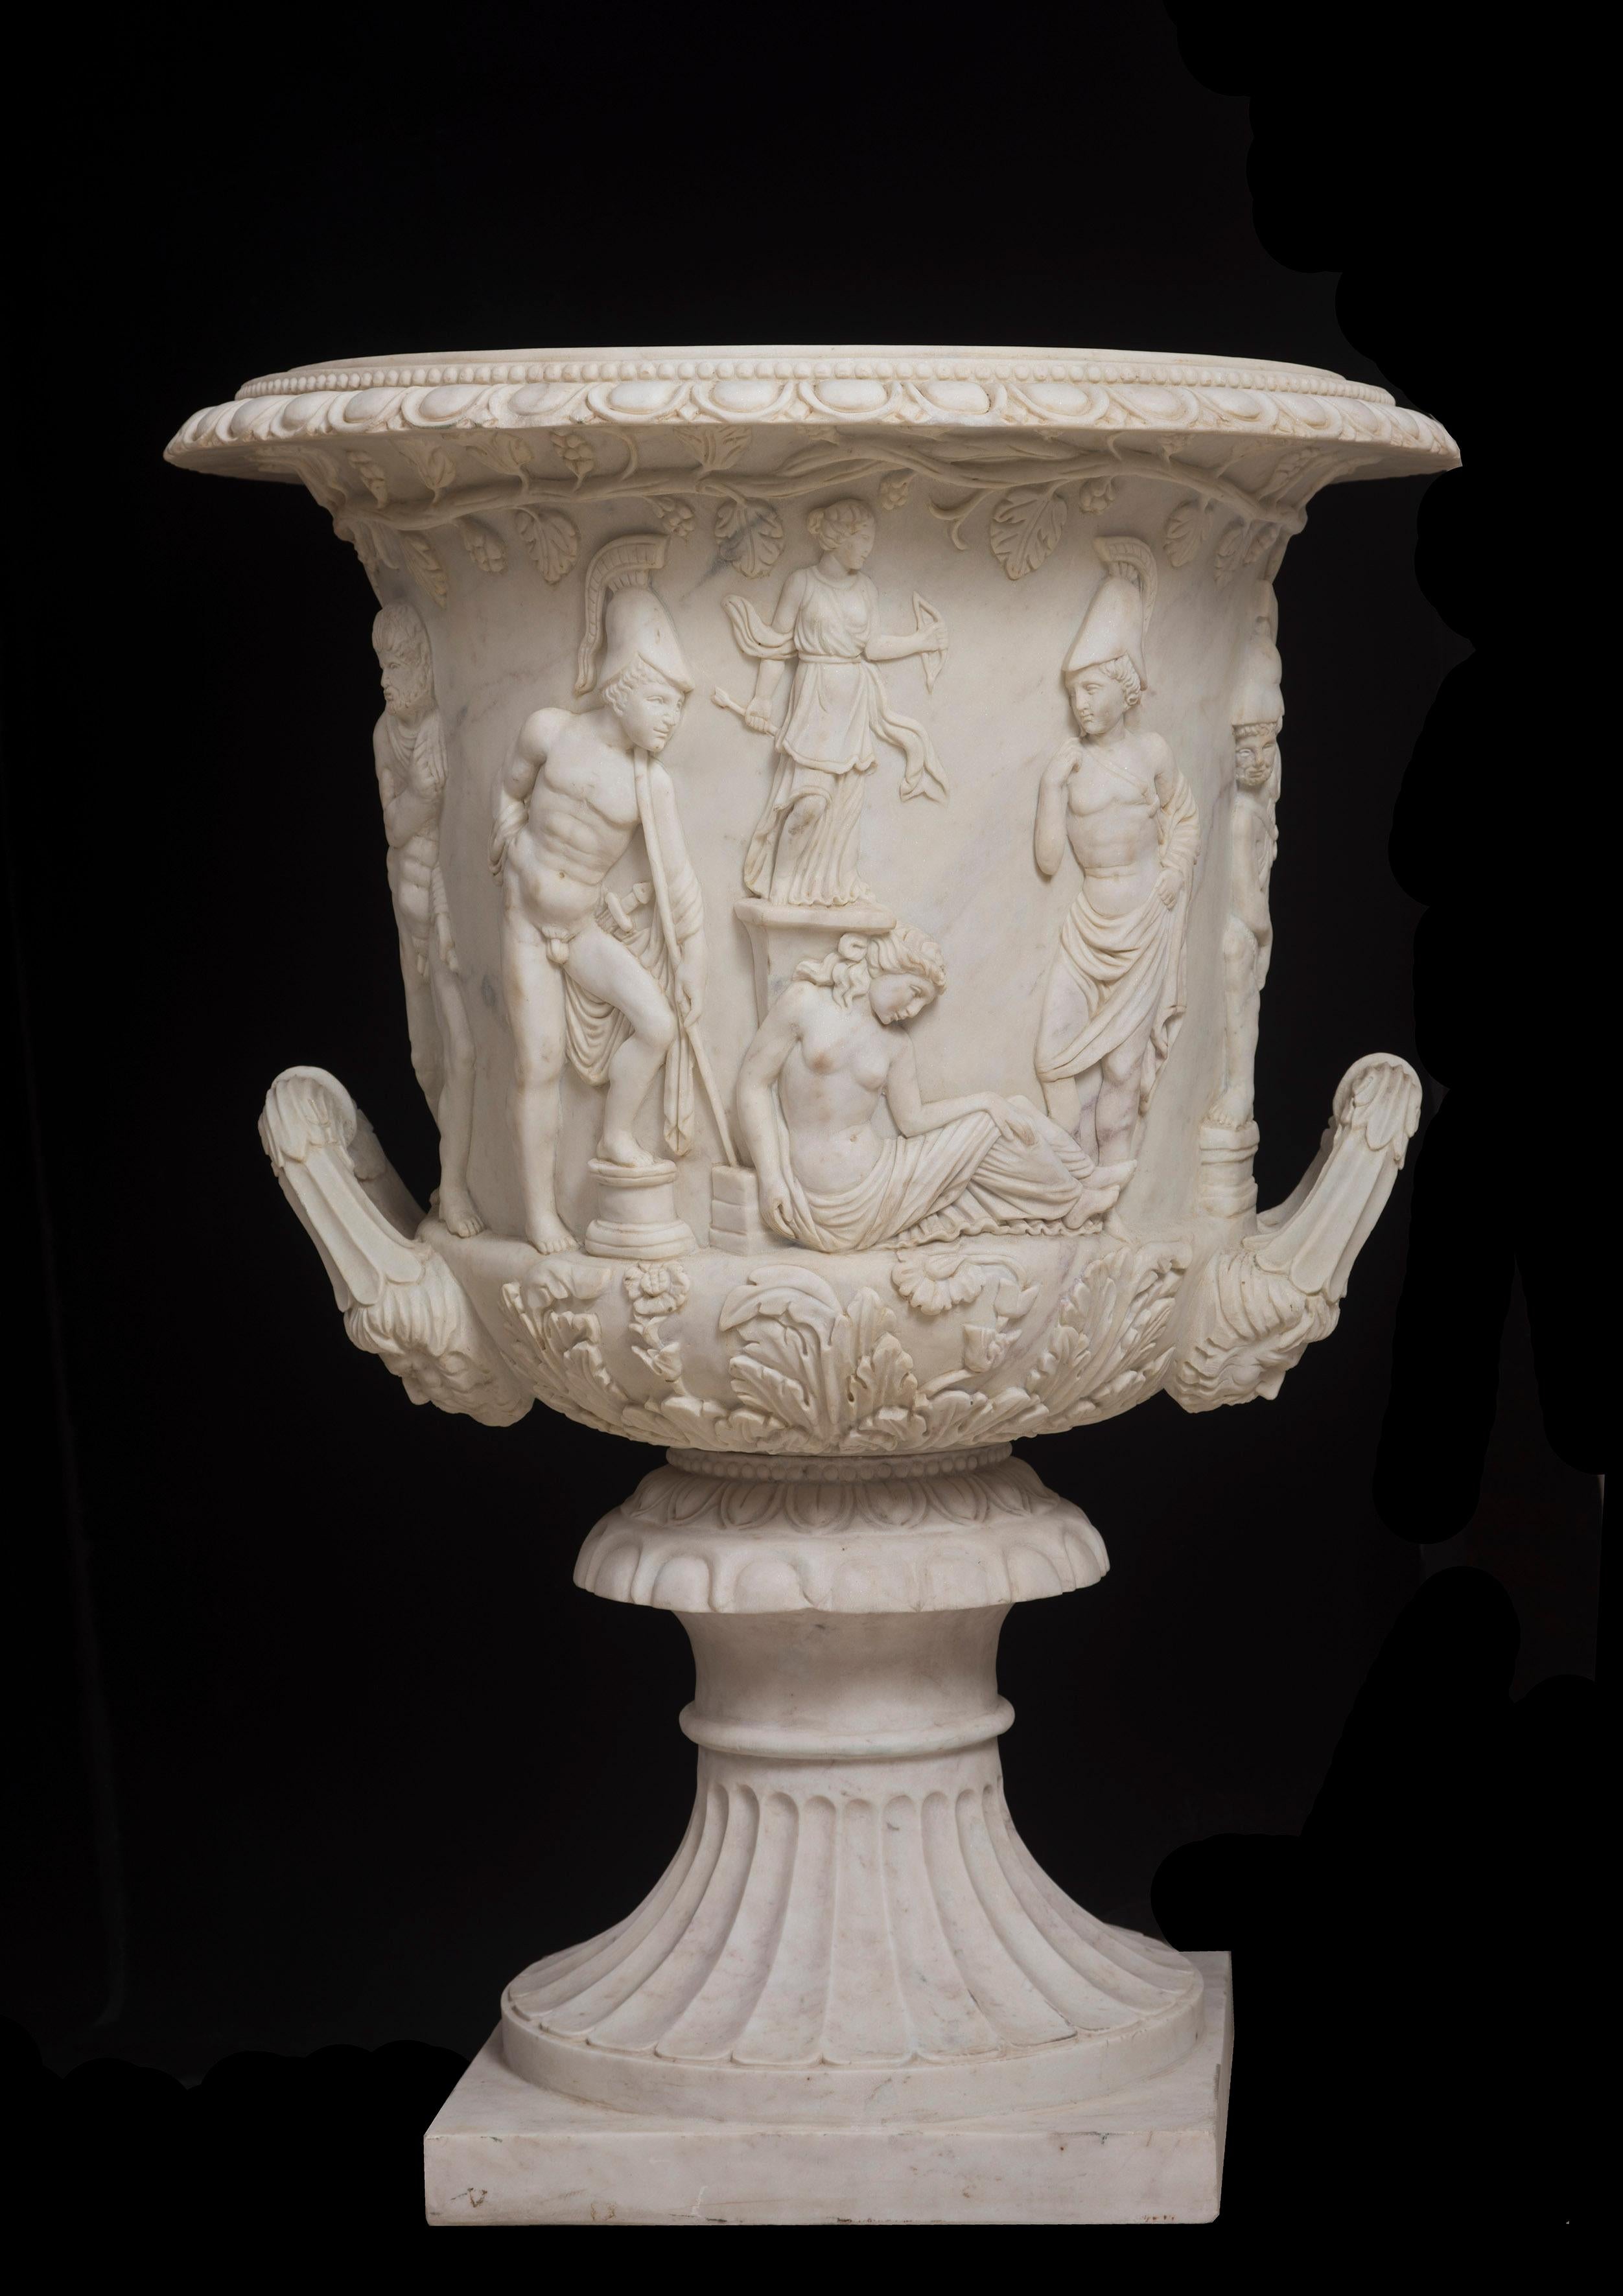 The original vase was probably Greek and was sculpted in Athens in the 1 century B.C. It was part of the ancient and iconic collection of Villa Medici, an important Villa in Rome. The vase reappeared in the 1598 inventory of the Villa Medici, Rome,